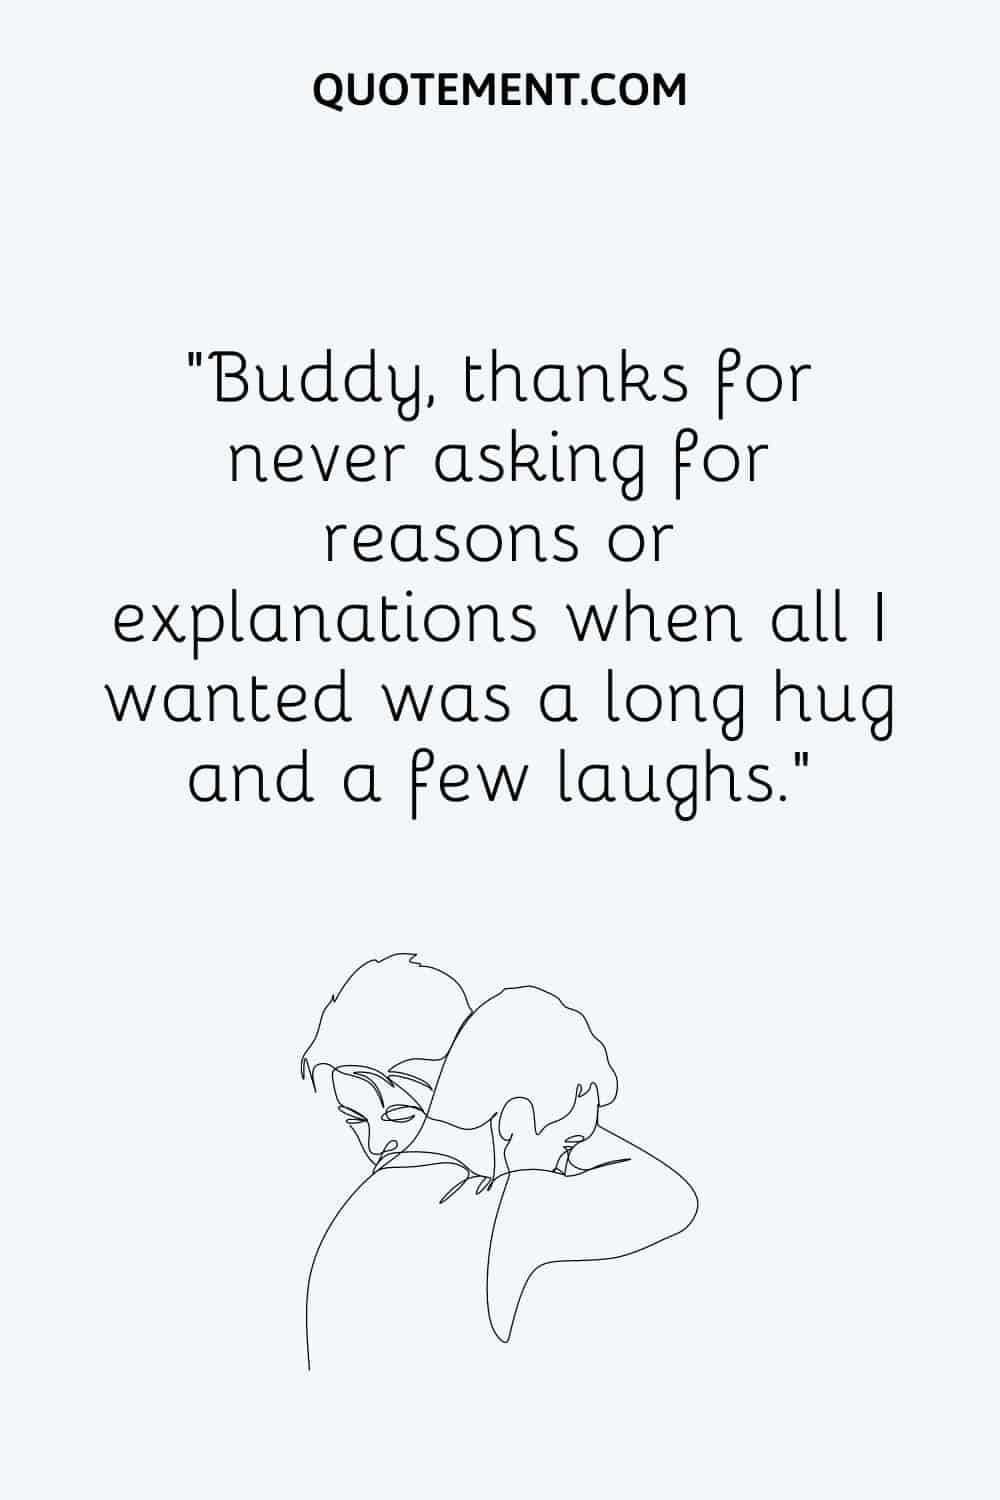 Buddy, thanks for never asking for reasons or explanations when all I wanted was a long hug and a few laughs